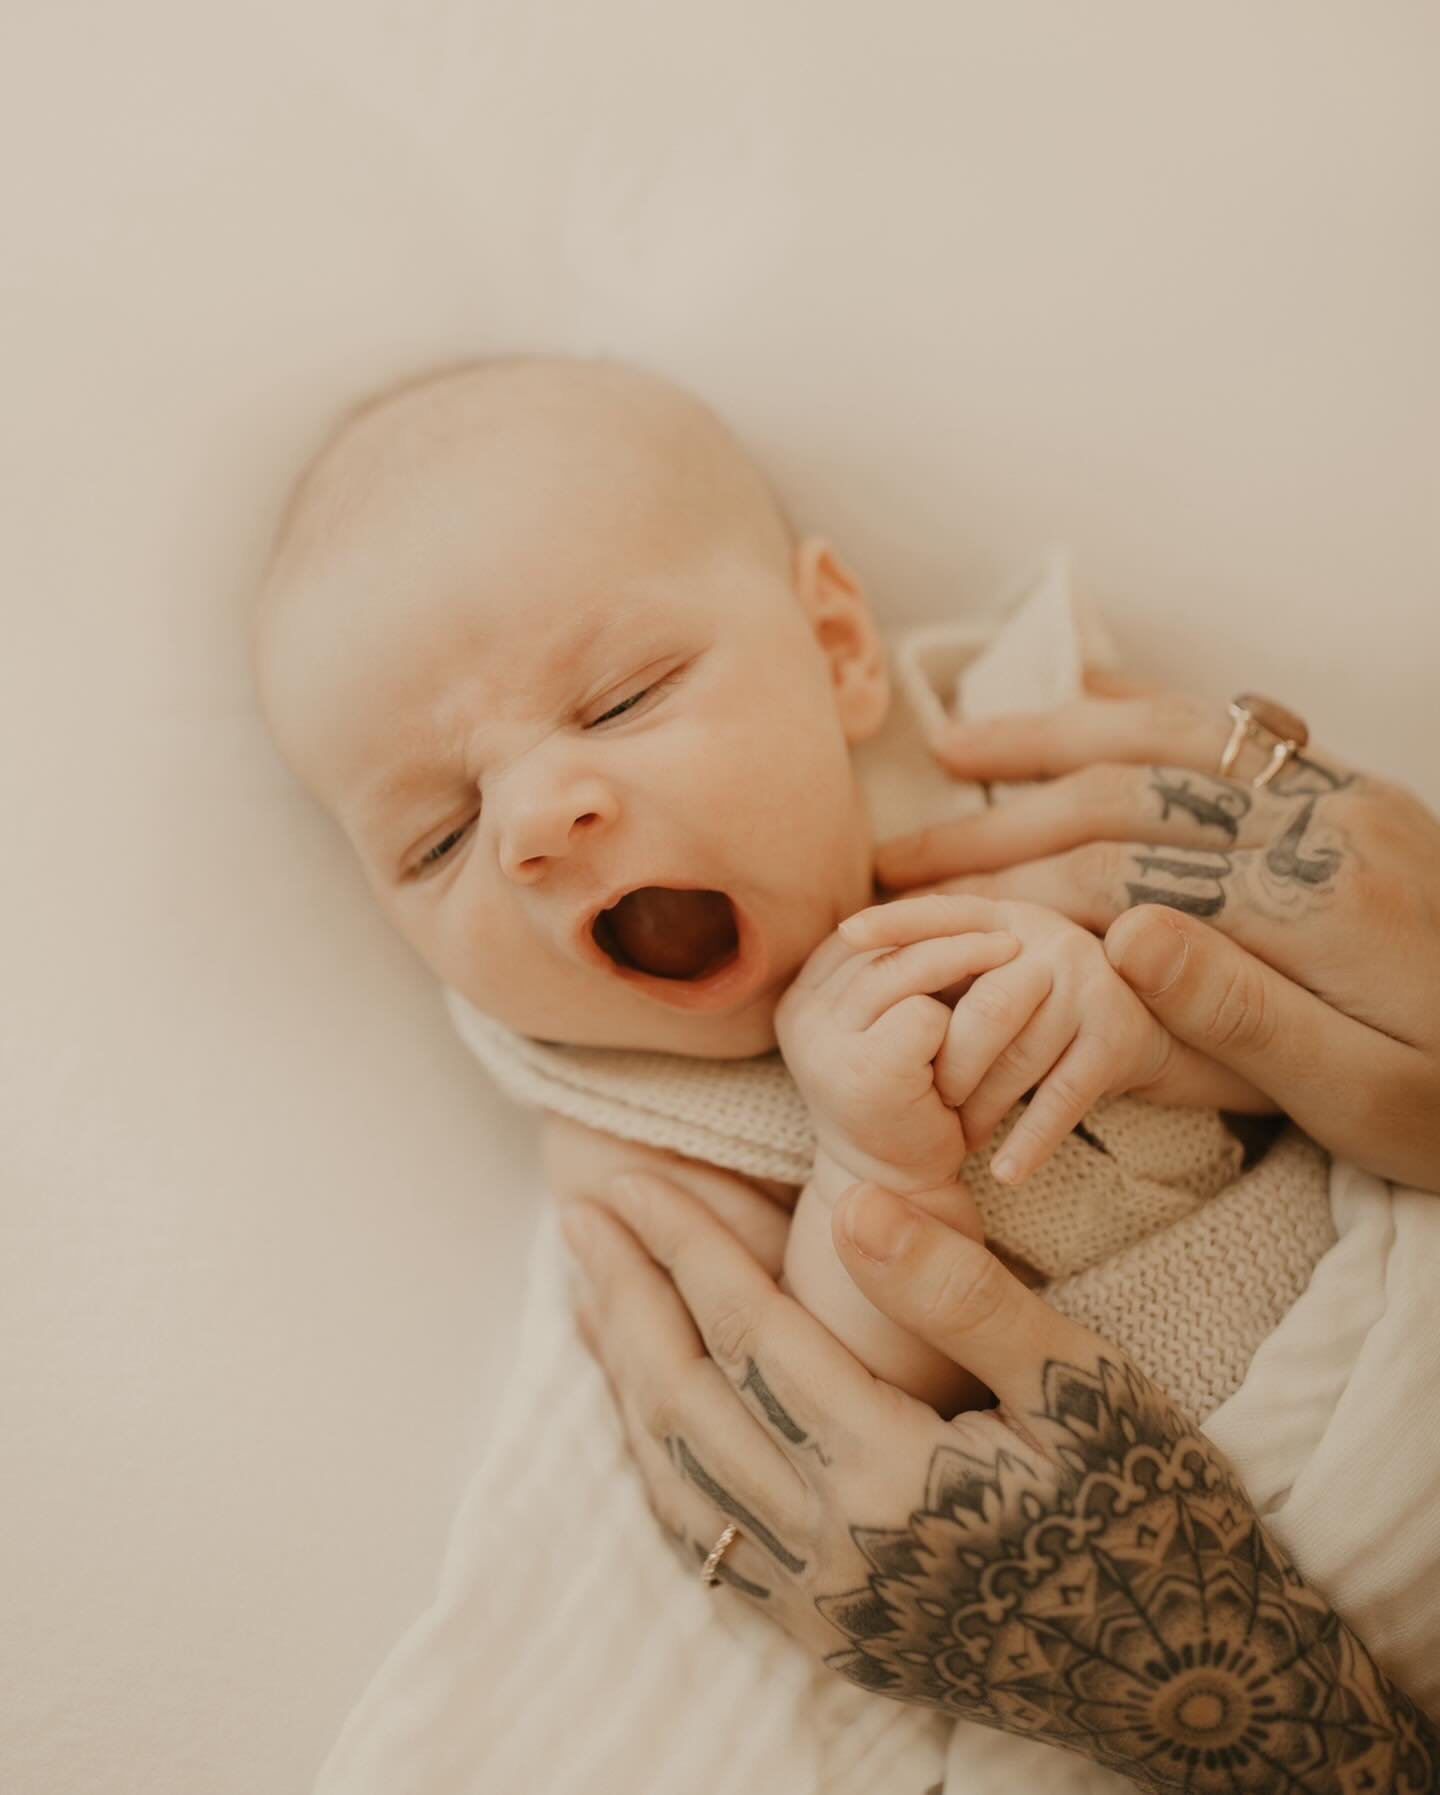 I always get really excited when I capture baby yawns. Most of the time they do it when im positioning them or not ready to take a photo, they&rsquo;re just super duper cute when they do. Something about it. Welcome earth side beautiful boy.